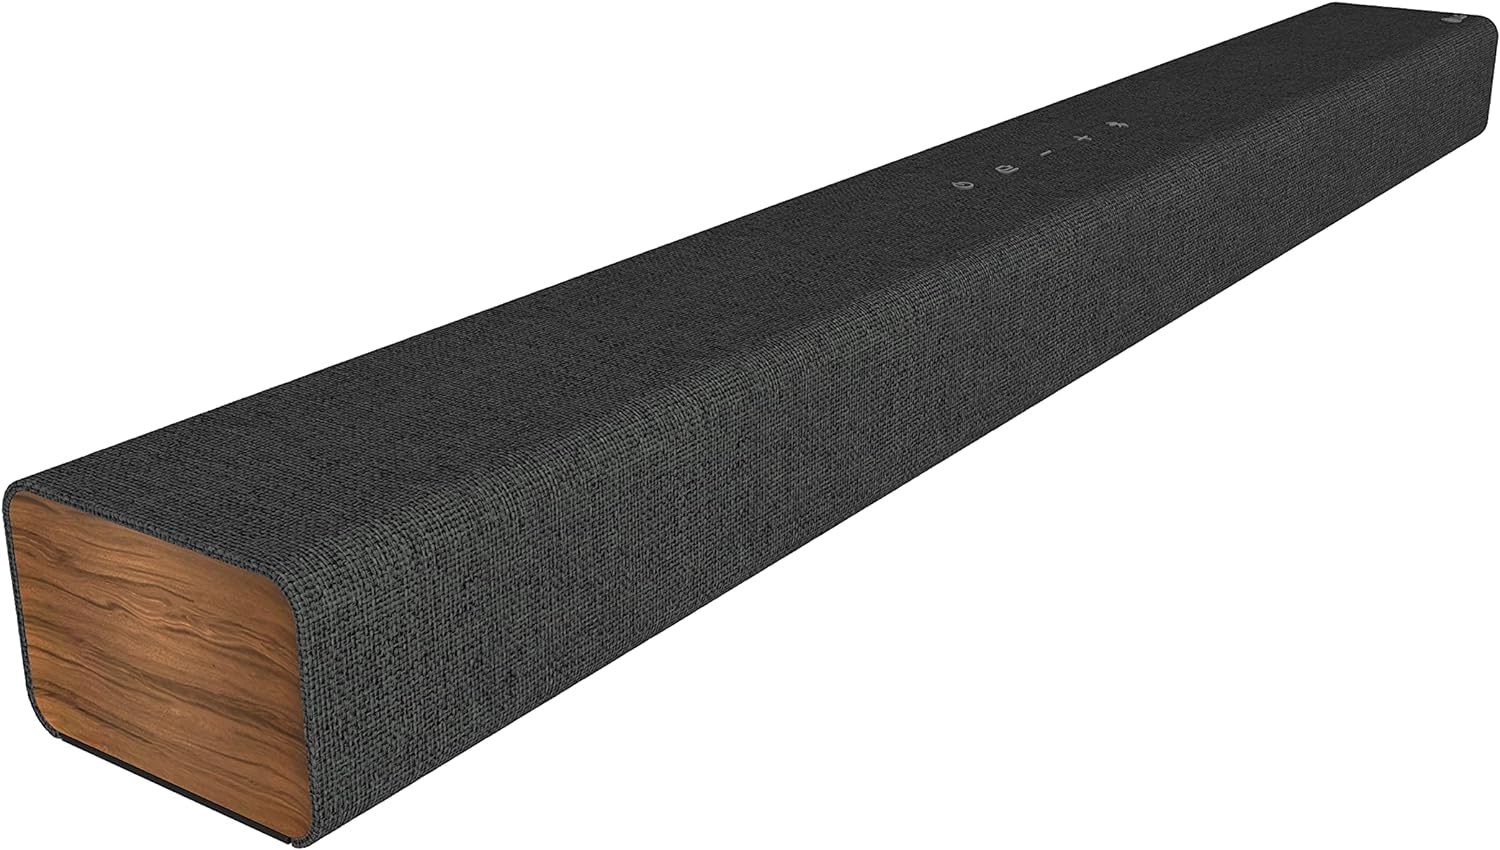 LG SP2 Sound Bar with Subwoofer Review